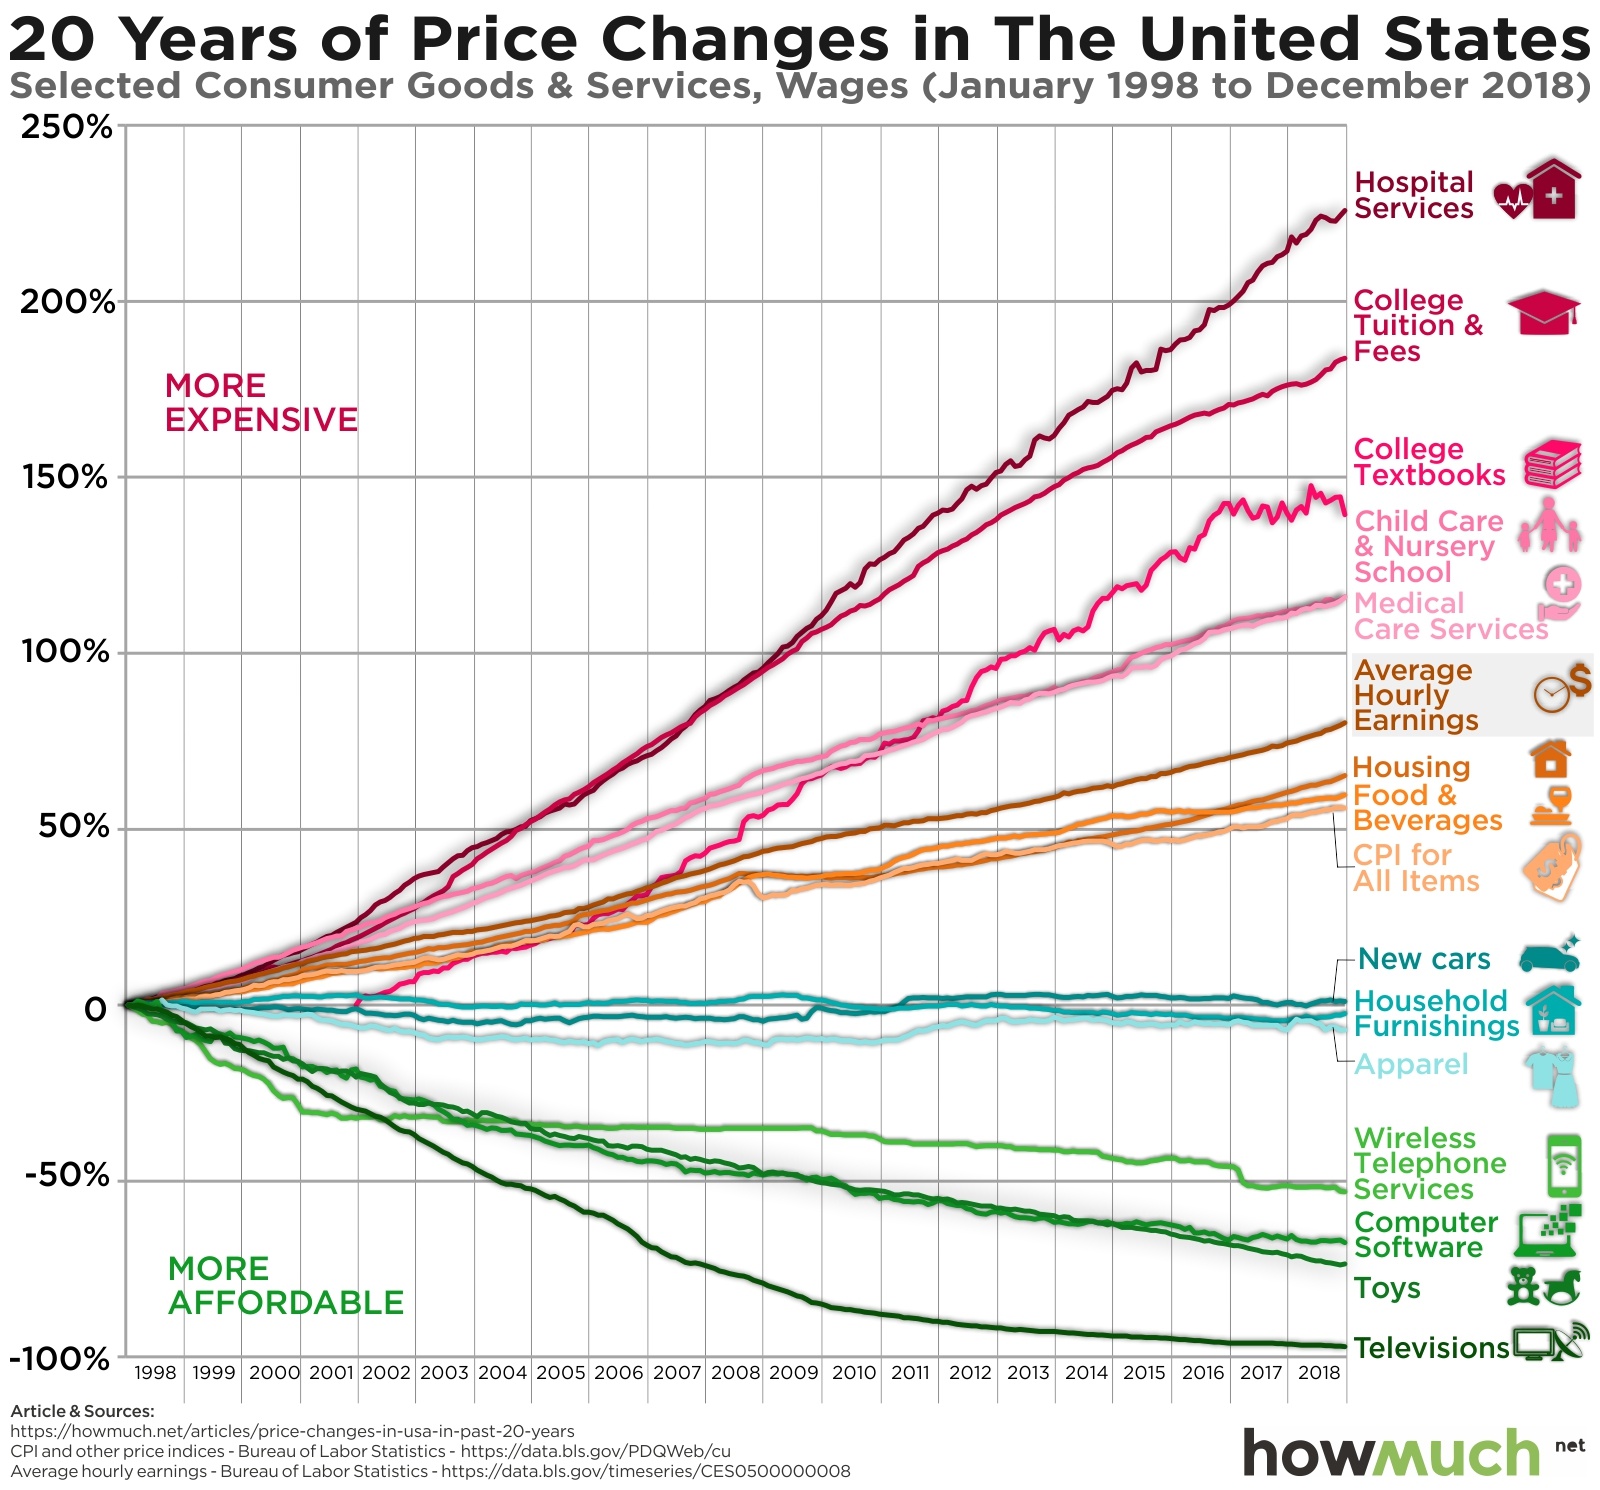 price-changes-in-usa-in-past-20-years-2294.jpg